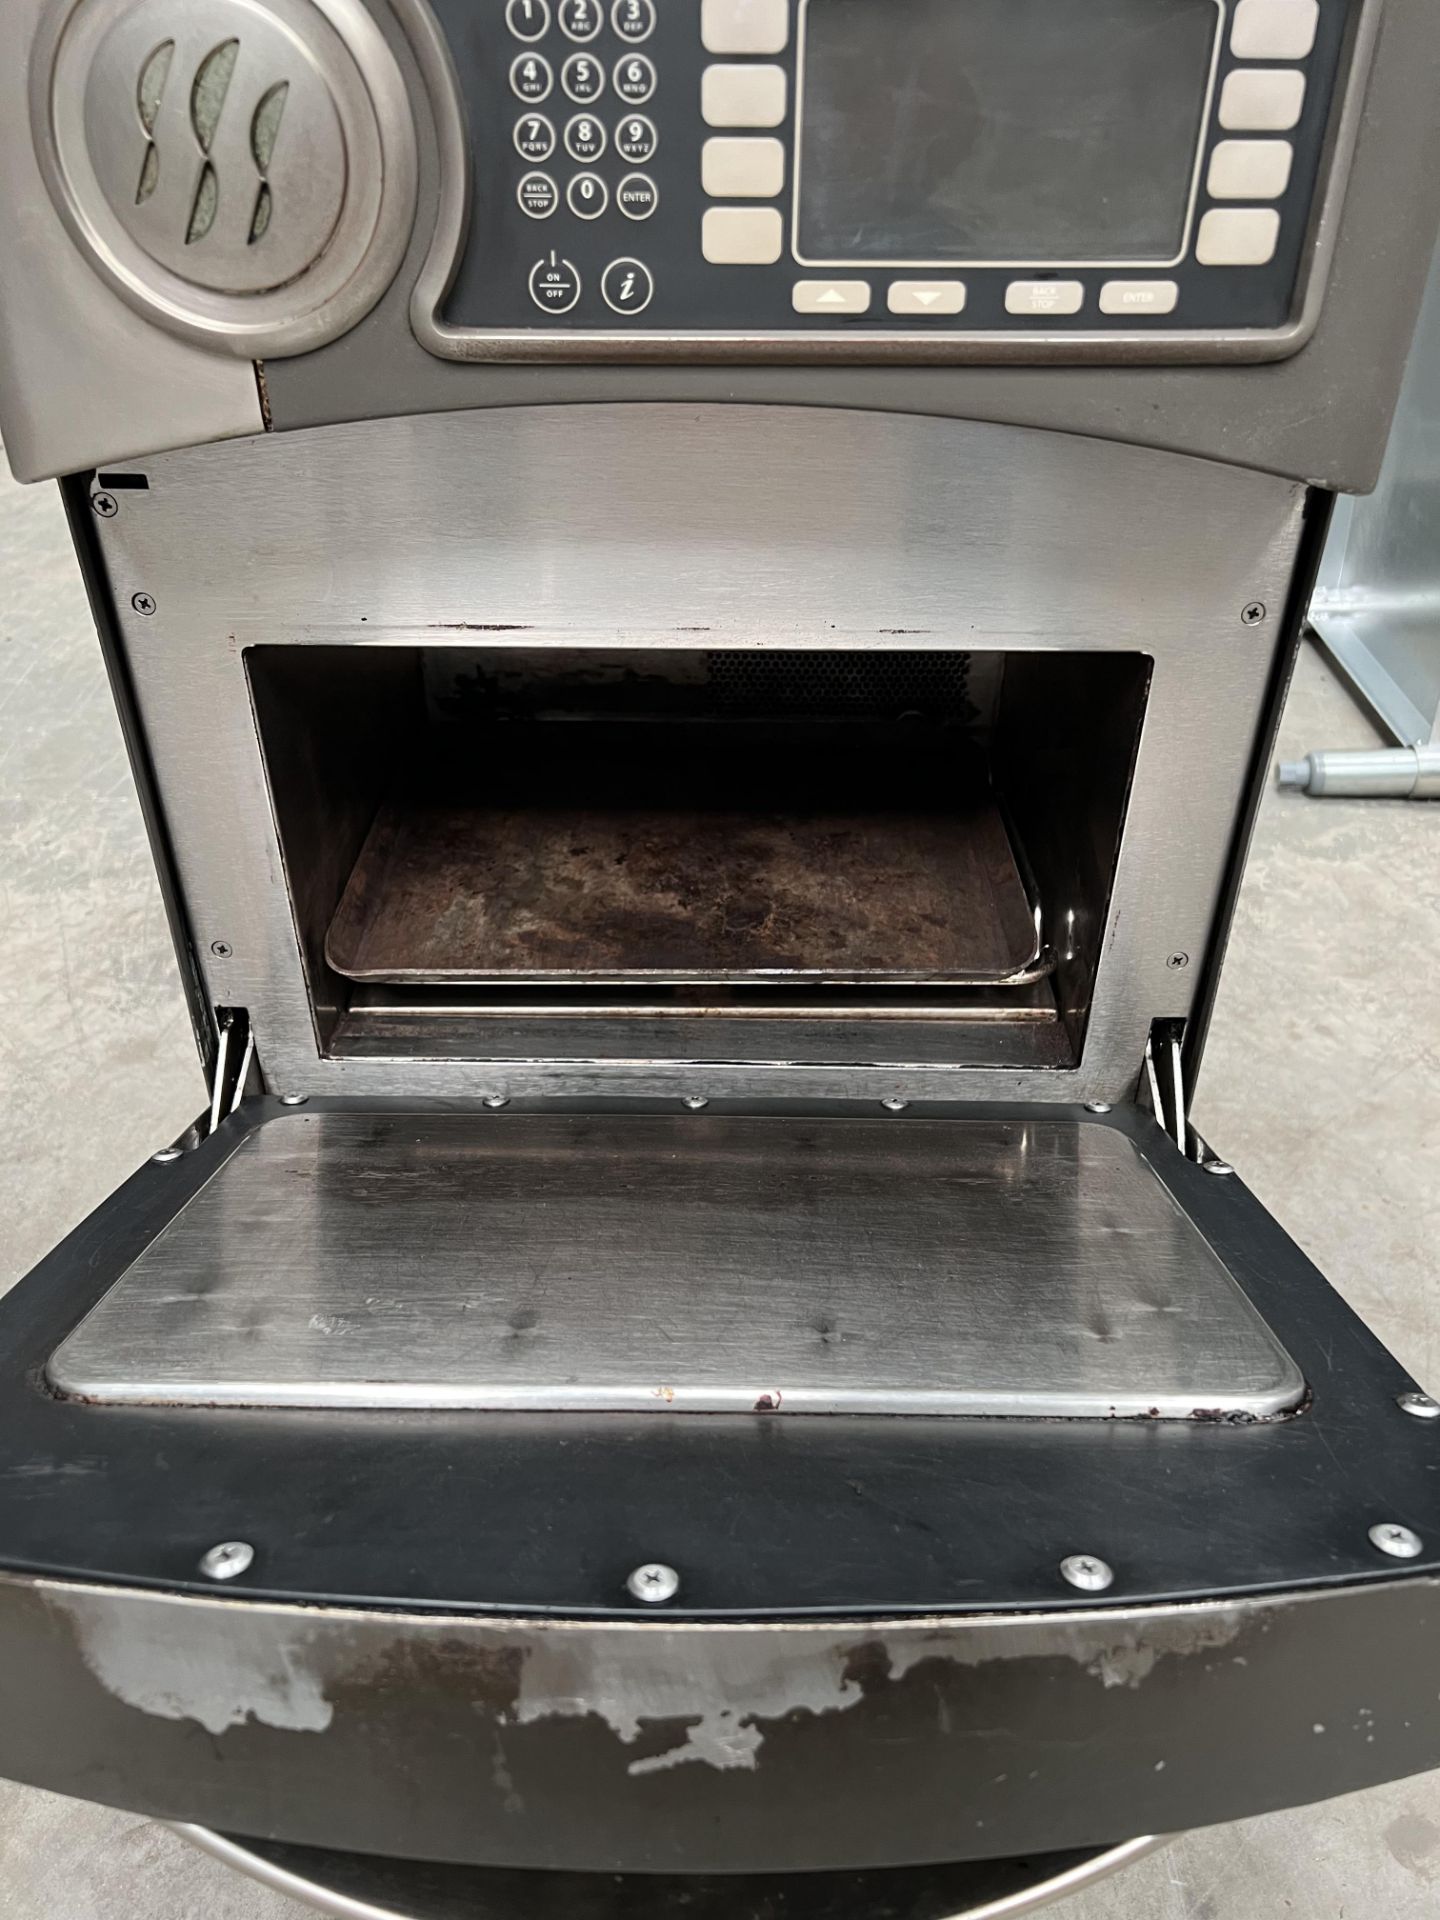 Turbochef High Speed Sota Combi Microwave Convection Oven - Image 3 of 3